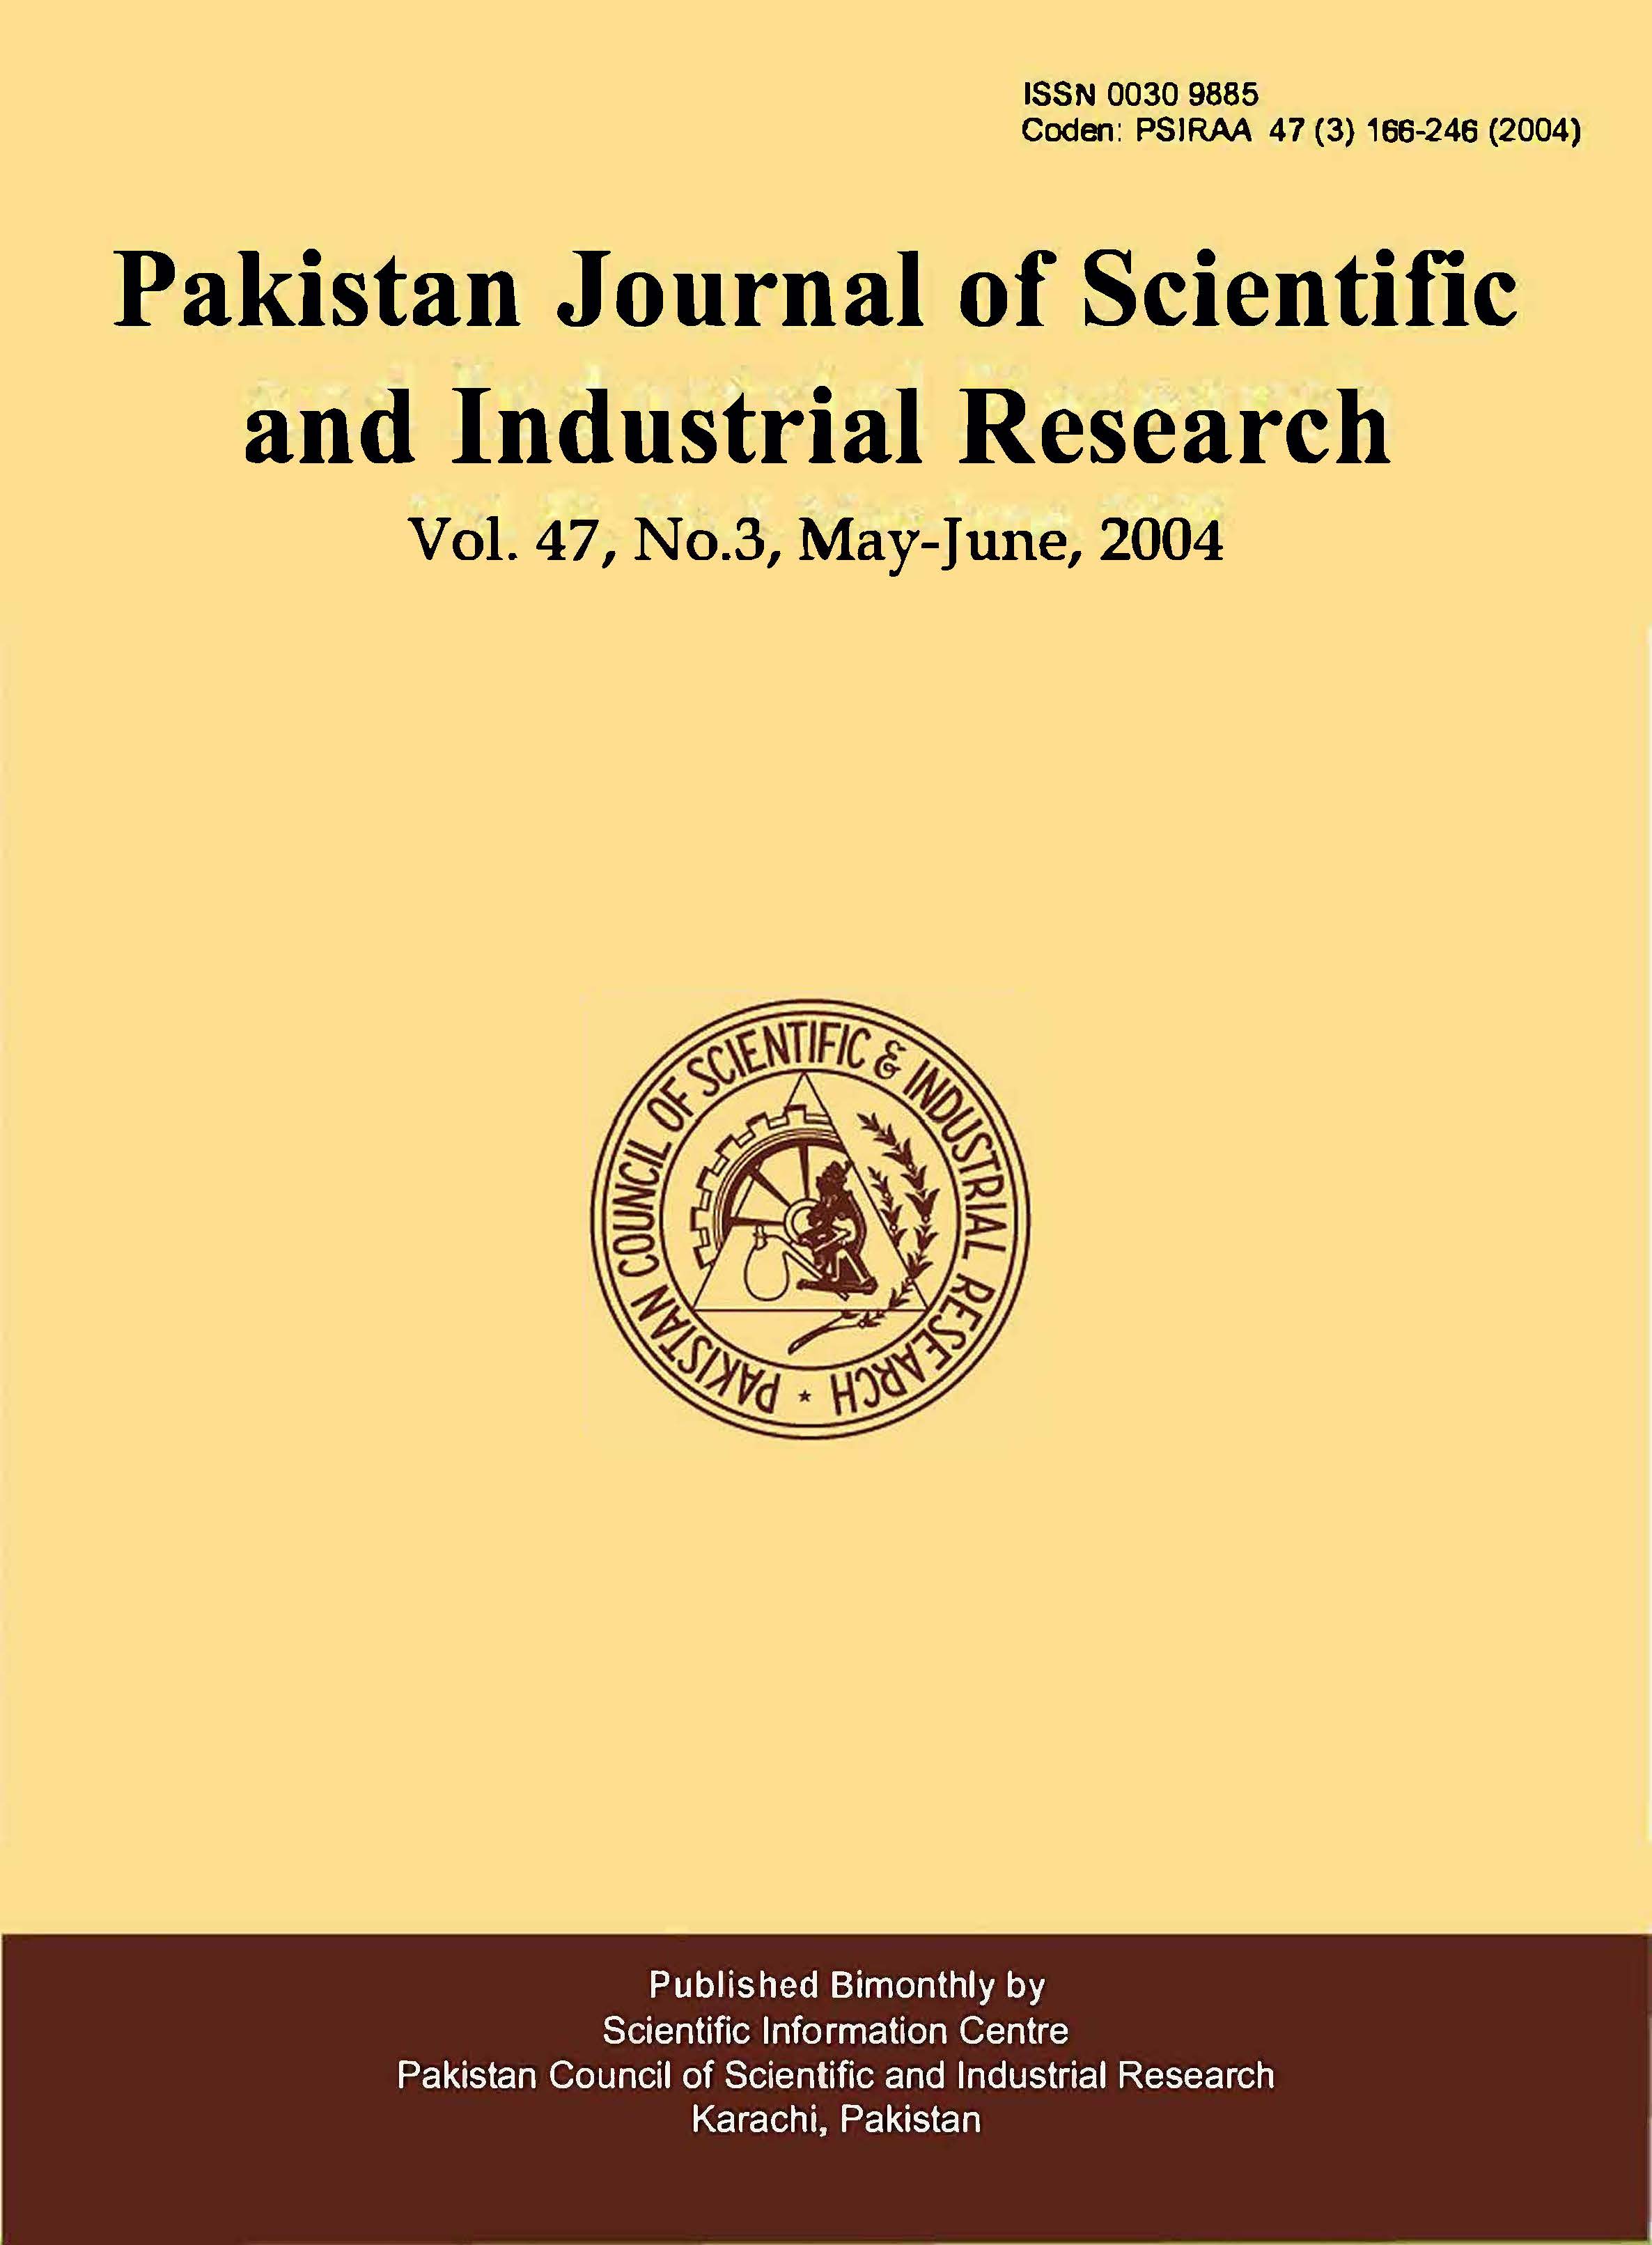 					View Vol. 47 No. 3 (2004): Pakistan Journal of Scientific and Industrial Research
				